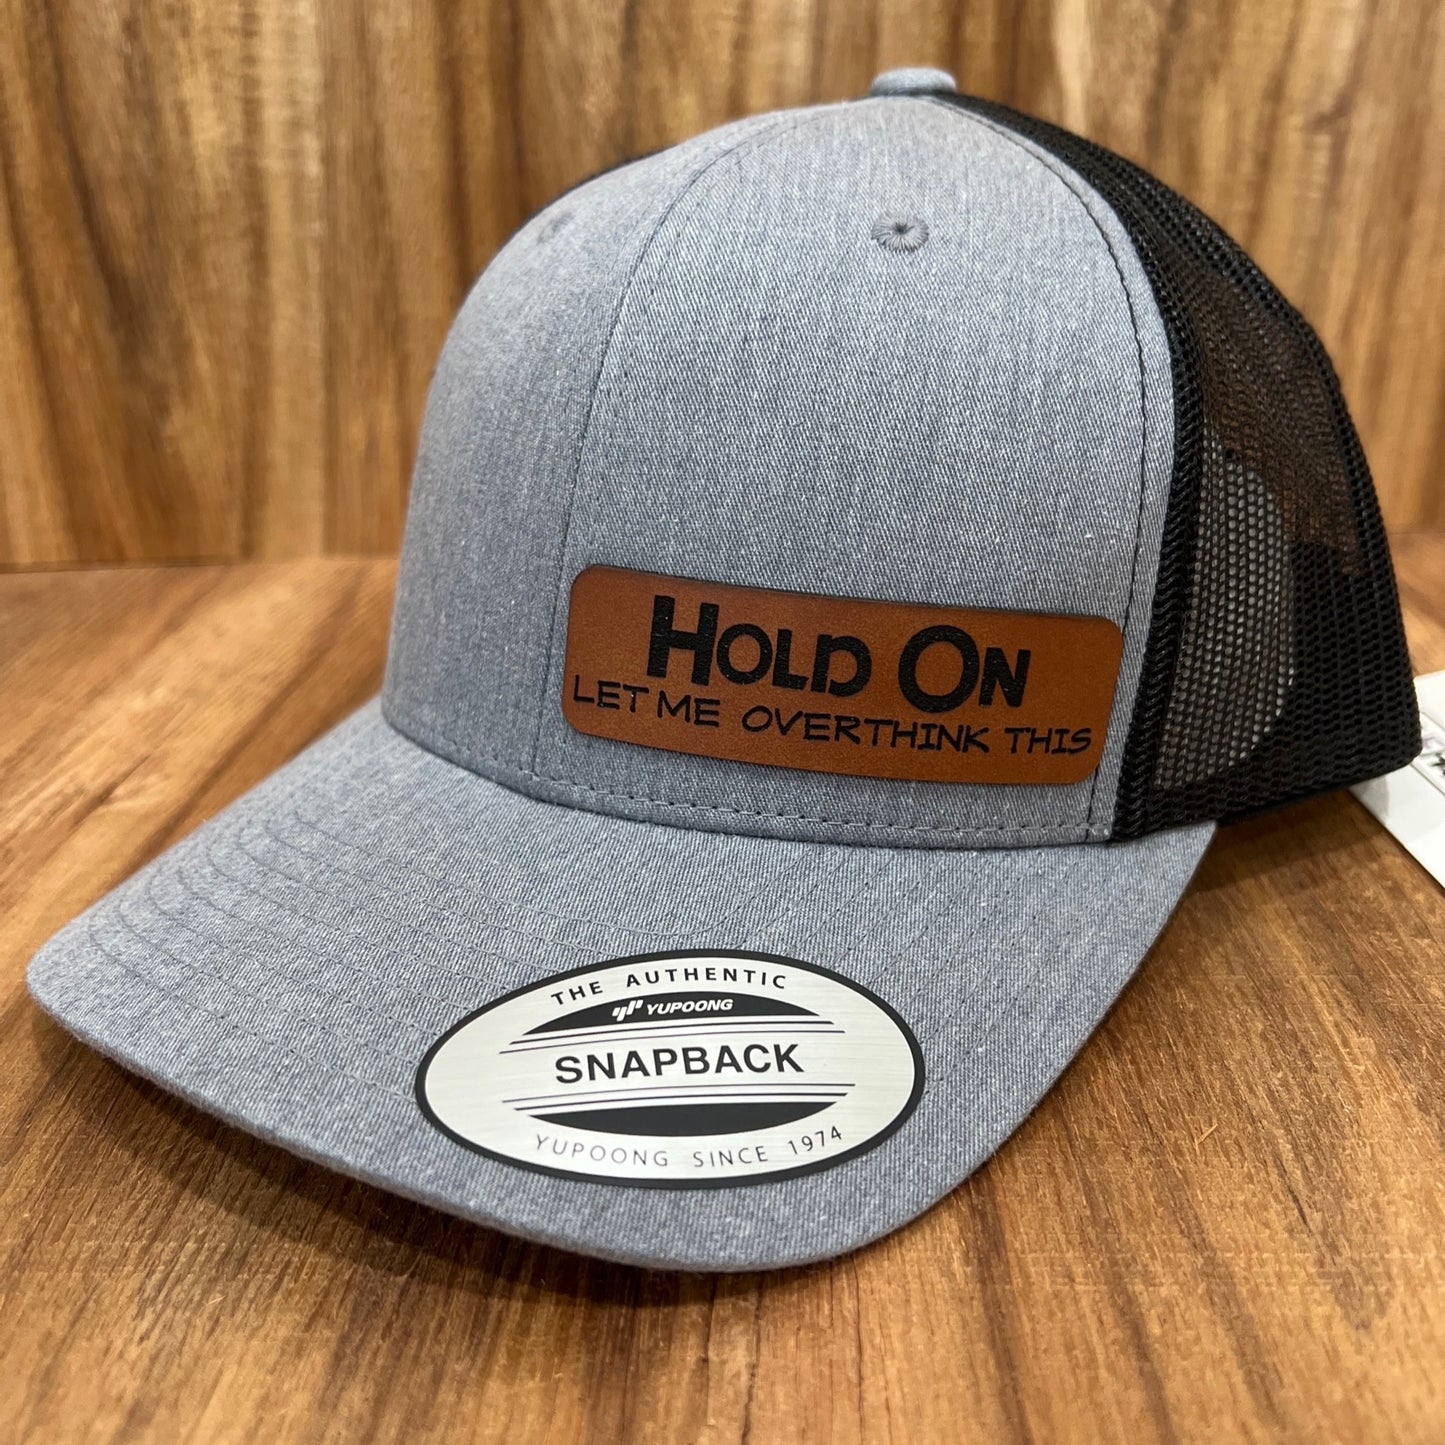 HOLD ON Let Me Overthink This - Yupoong 6606 SnapBack Trucker Hat